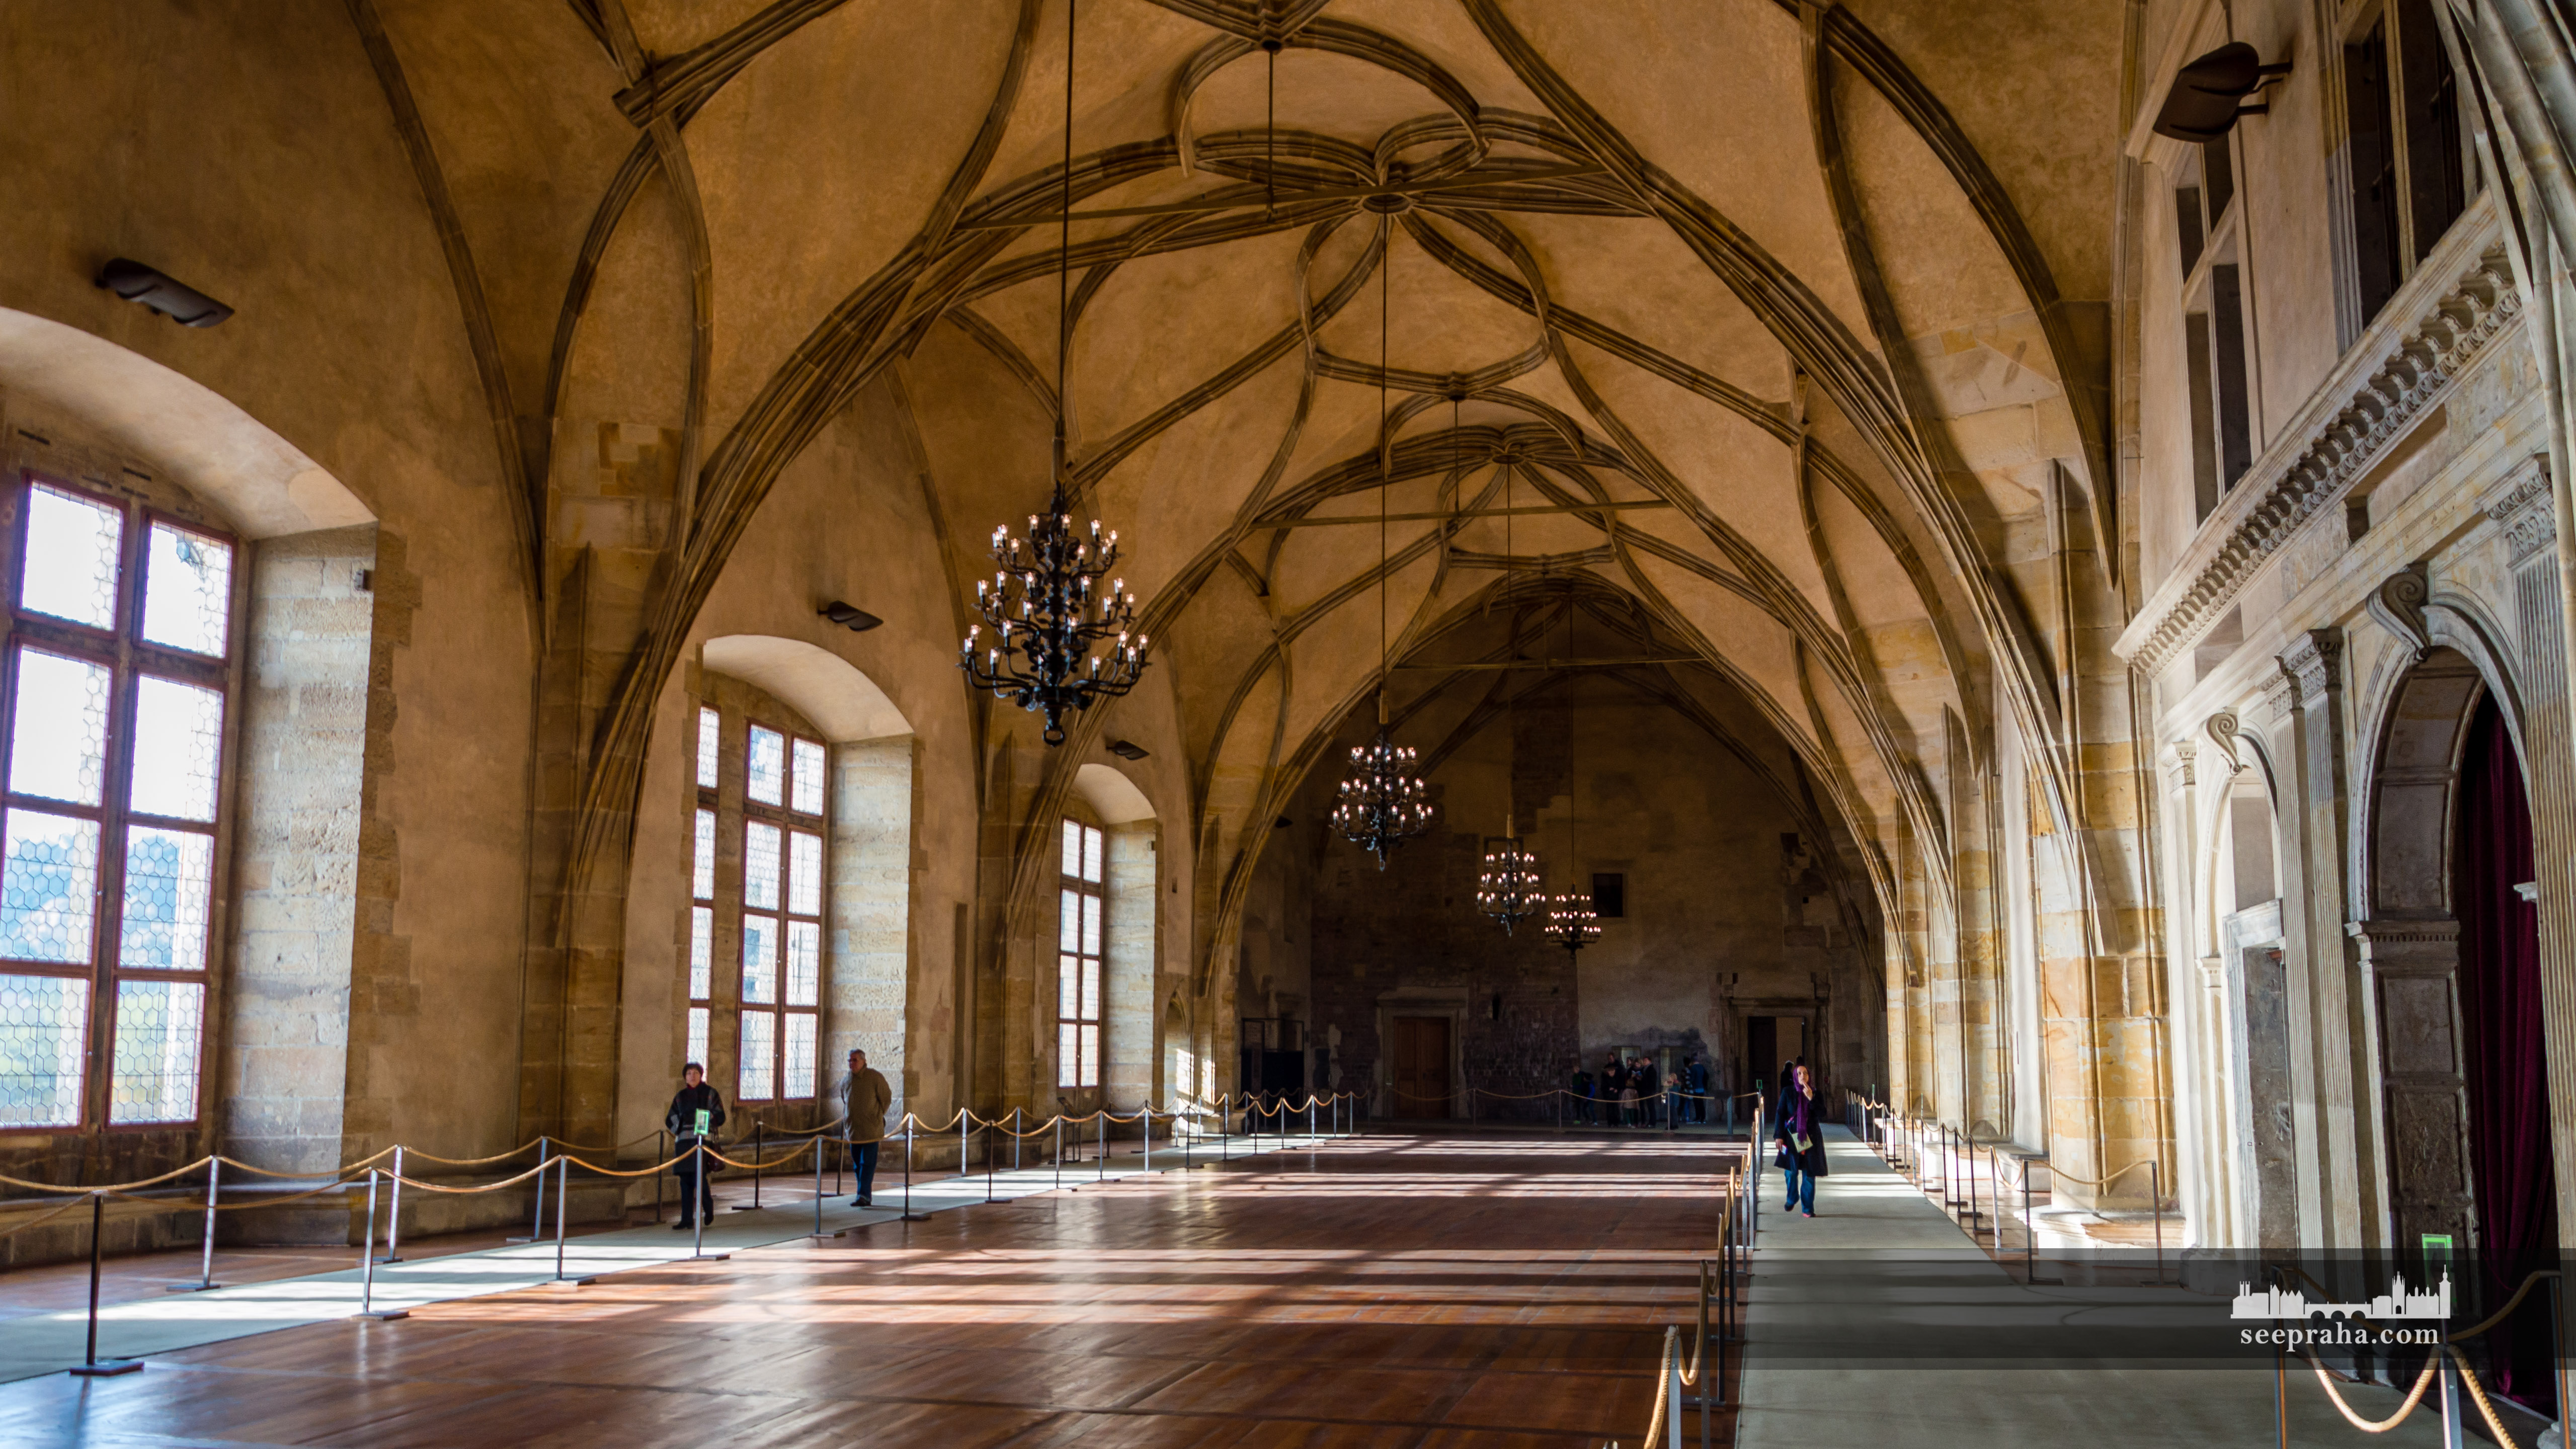 Interior of the Old Royal Palace, Prague, Czech Republic